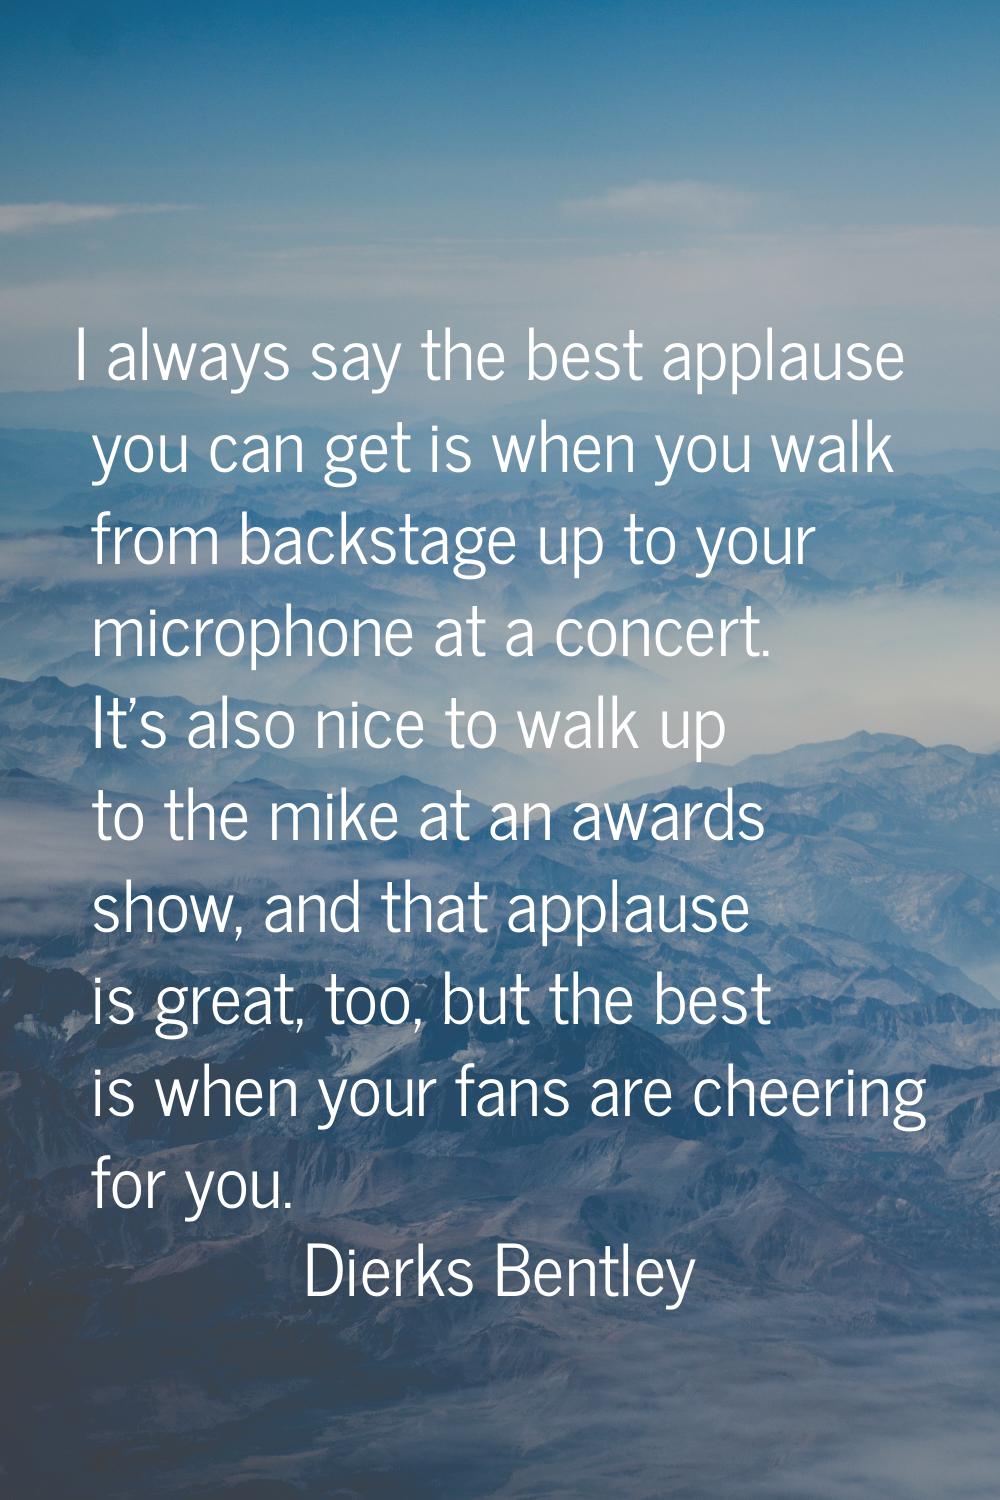 I always say the best applause you can get is when you walk from backstage up to your microphone at